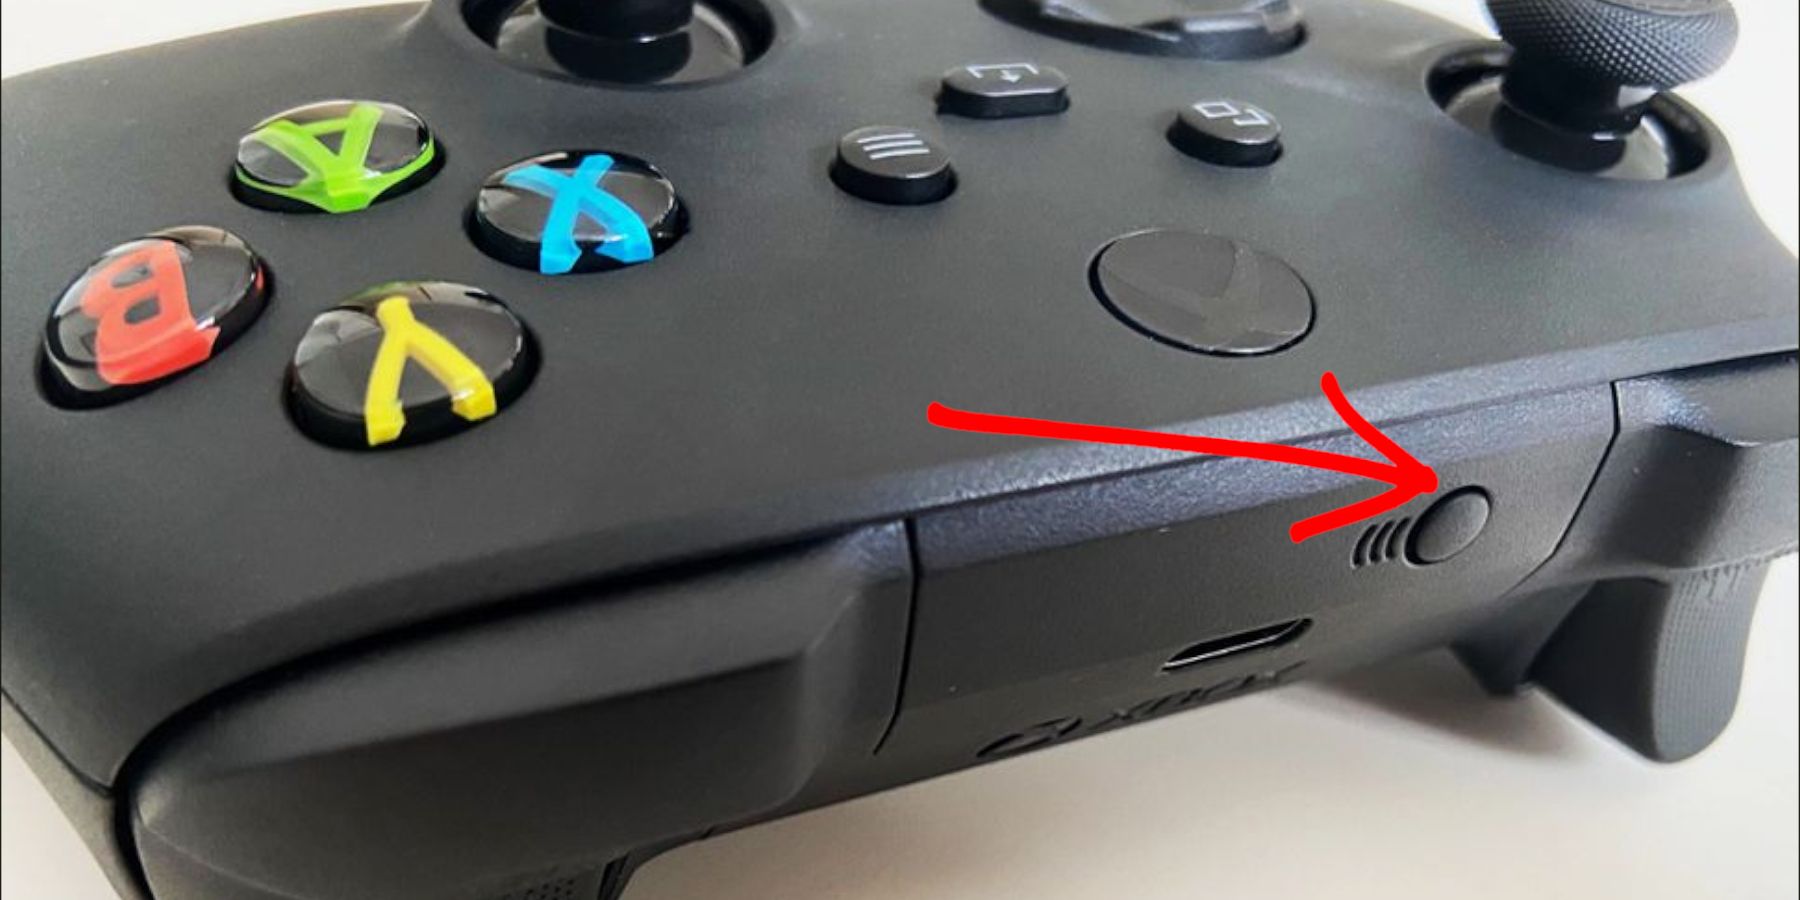 How to connect an Xbox One controller to Xbox Series X/S